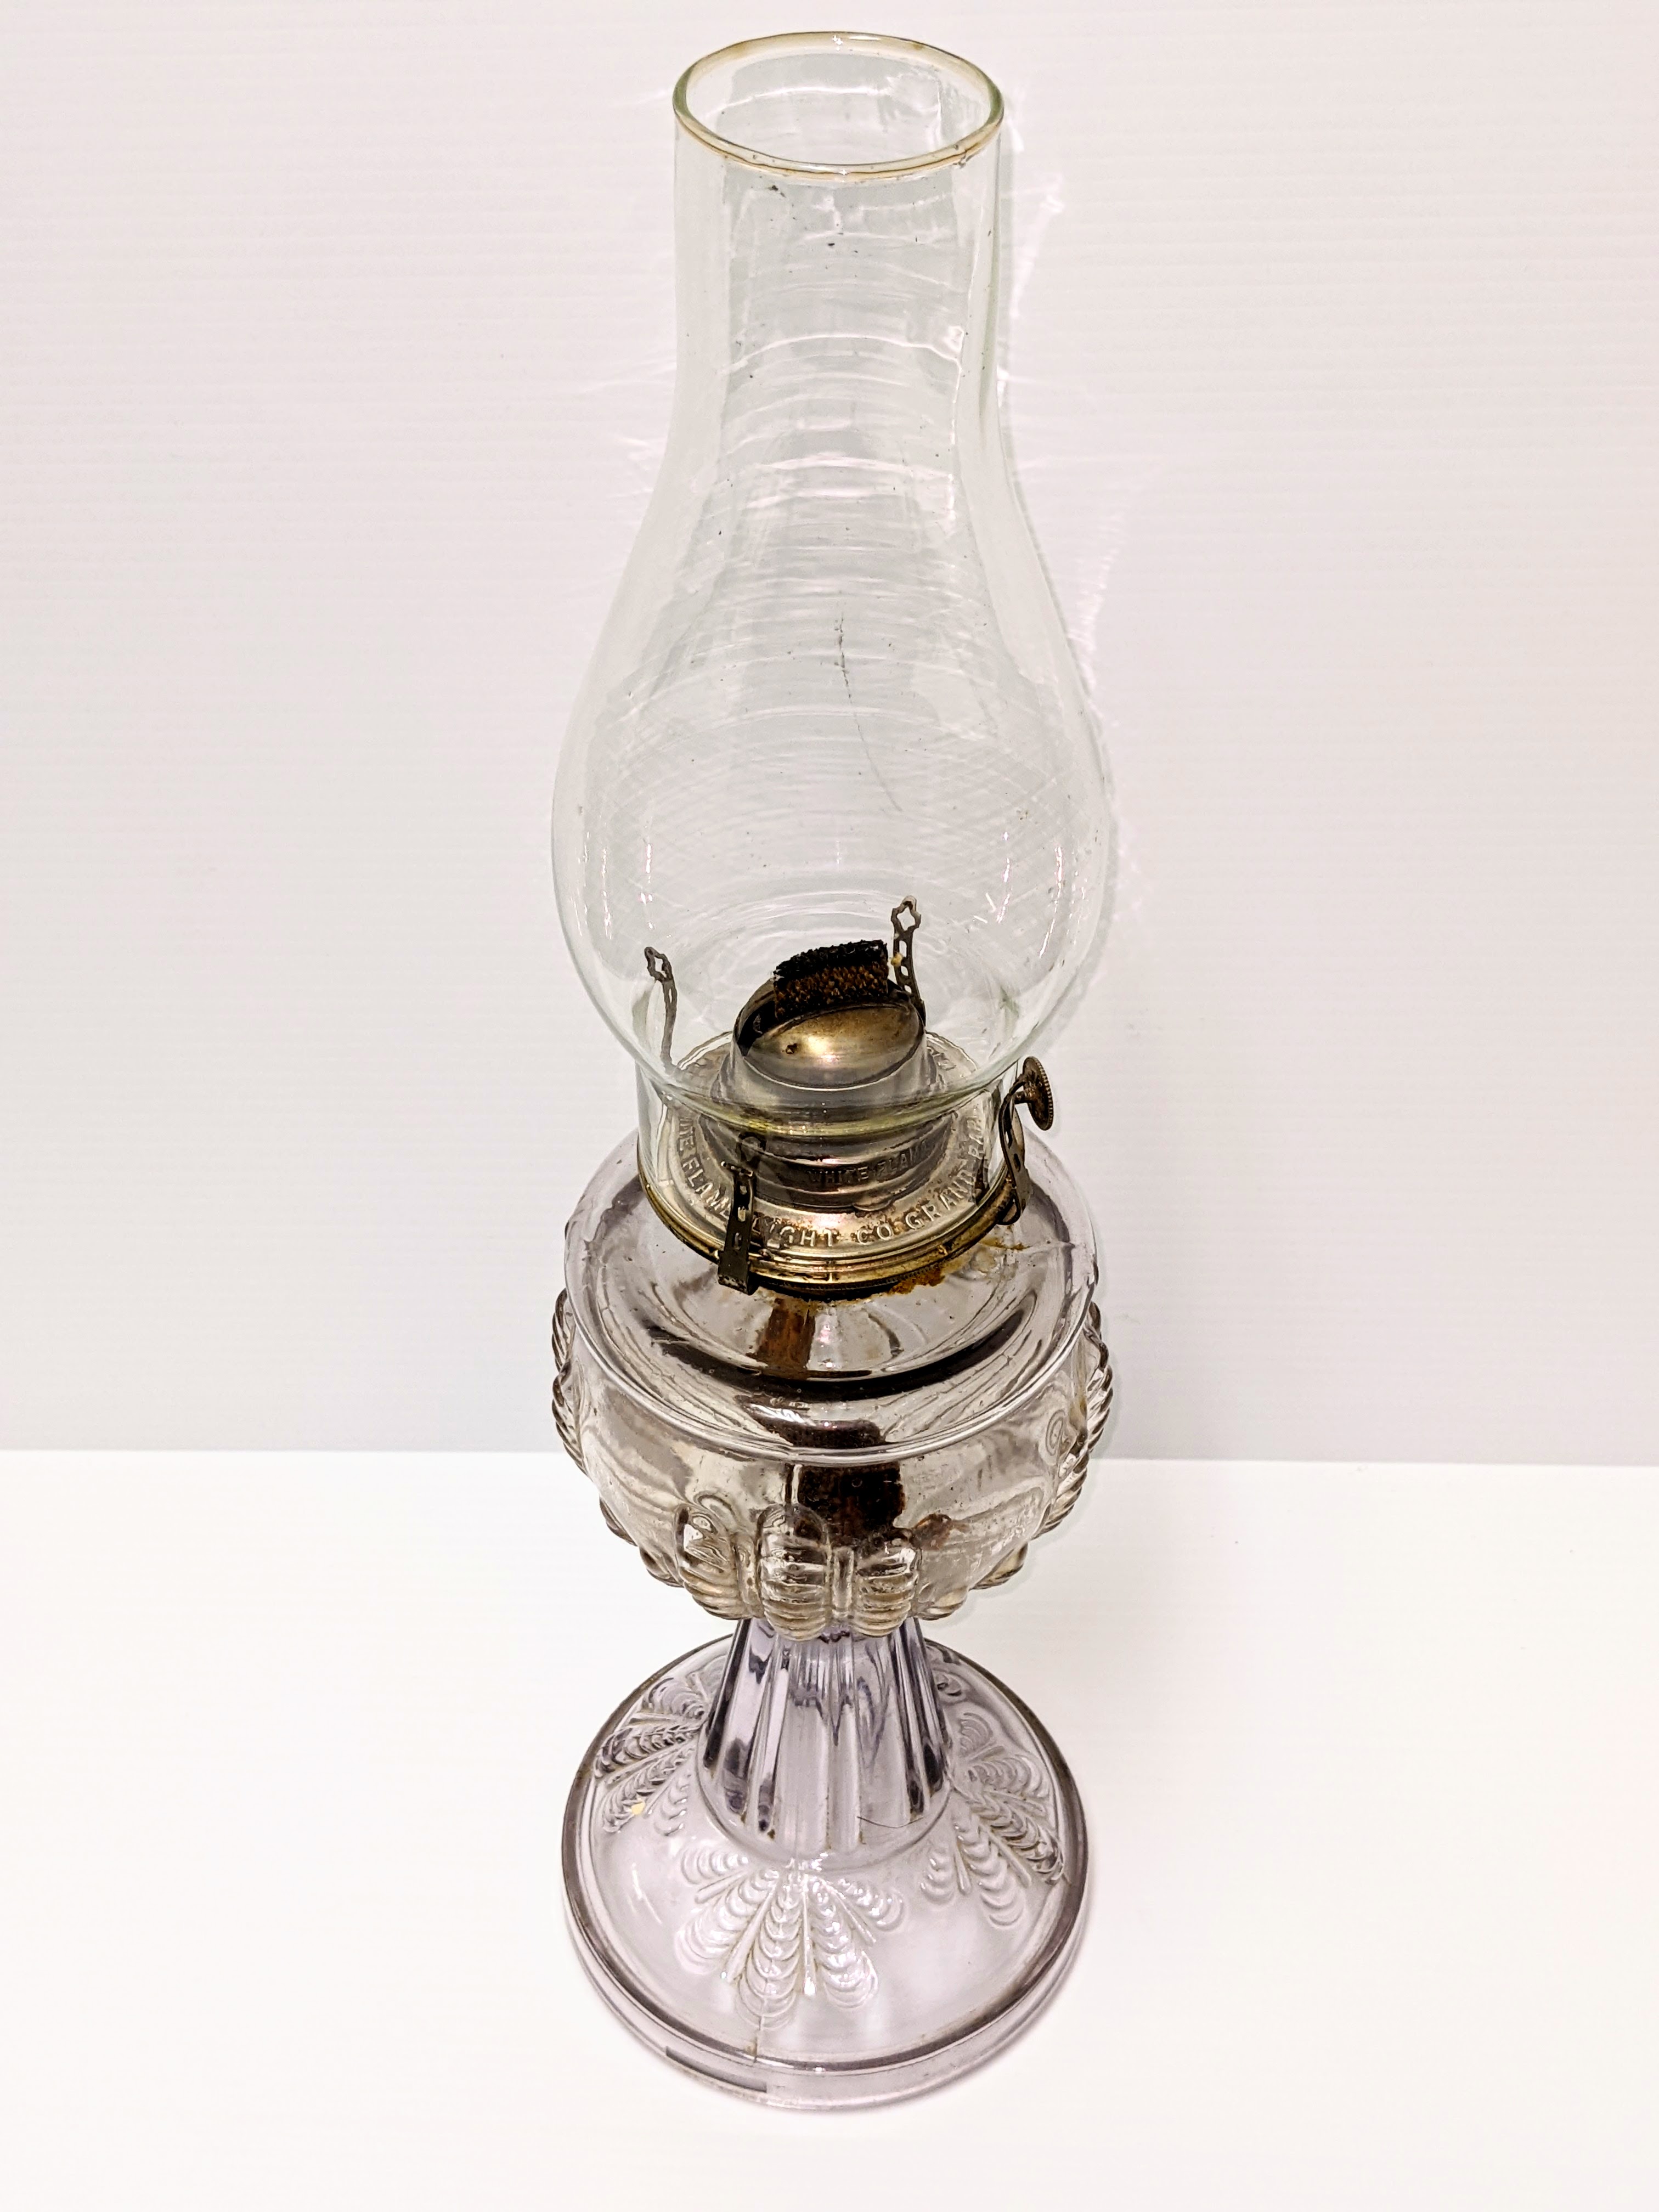 Today is International Day of Light! In recognition of this we have picked a oil lamp as our artifact of the week! This particular lamp was made by the "White Light company" and its decorative design is known as "Turkey Foot". It is difficult to see in the picture but the lamp does have a purple hue to its glass base. We have come a long way with our use of light making devices; from this simple lantern used only as a light source to laser light which contributes to medical, industrial, and research fields.
16/05/2022
995.2.50 / Bell, Lorna